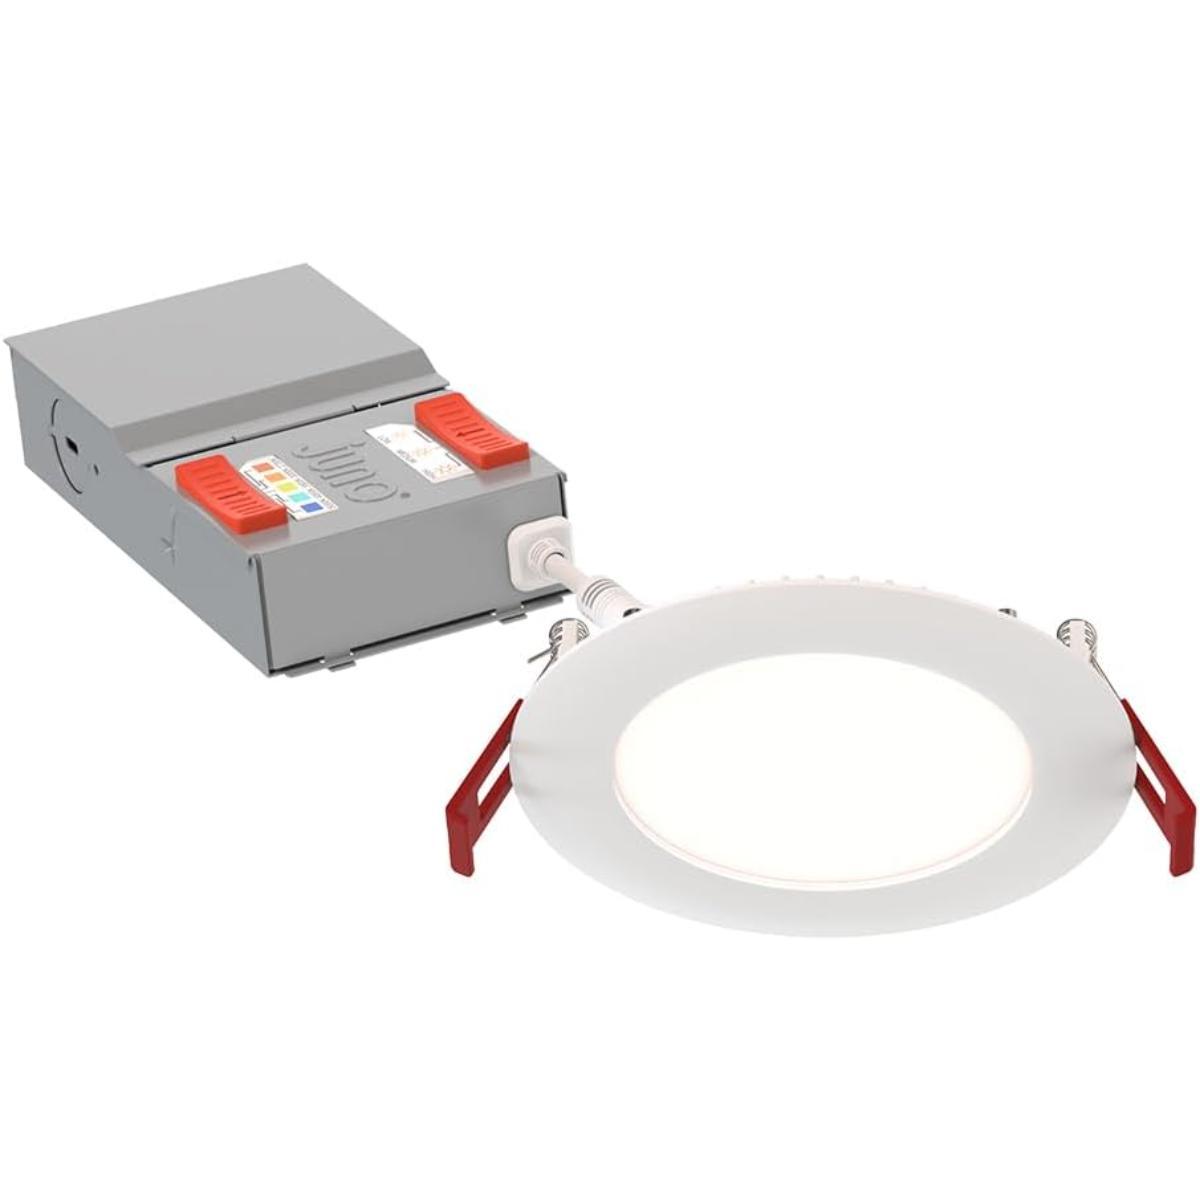 4 inch Wafer Ultra Thin Canless LED Recessed Light, 14.5 Watt, 1100 Lumens, Selectable CCT, 2700K to 5000K, 120V